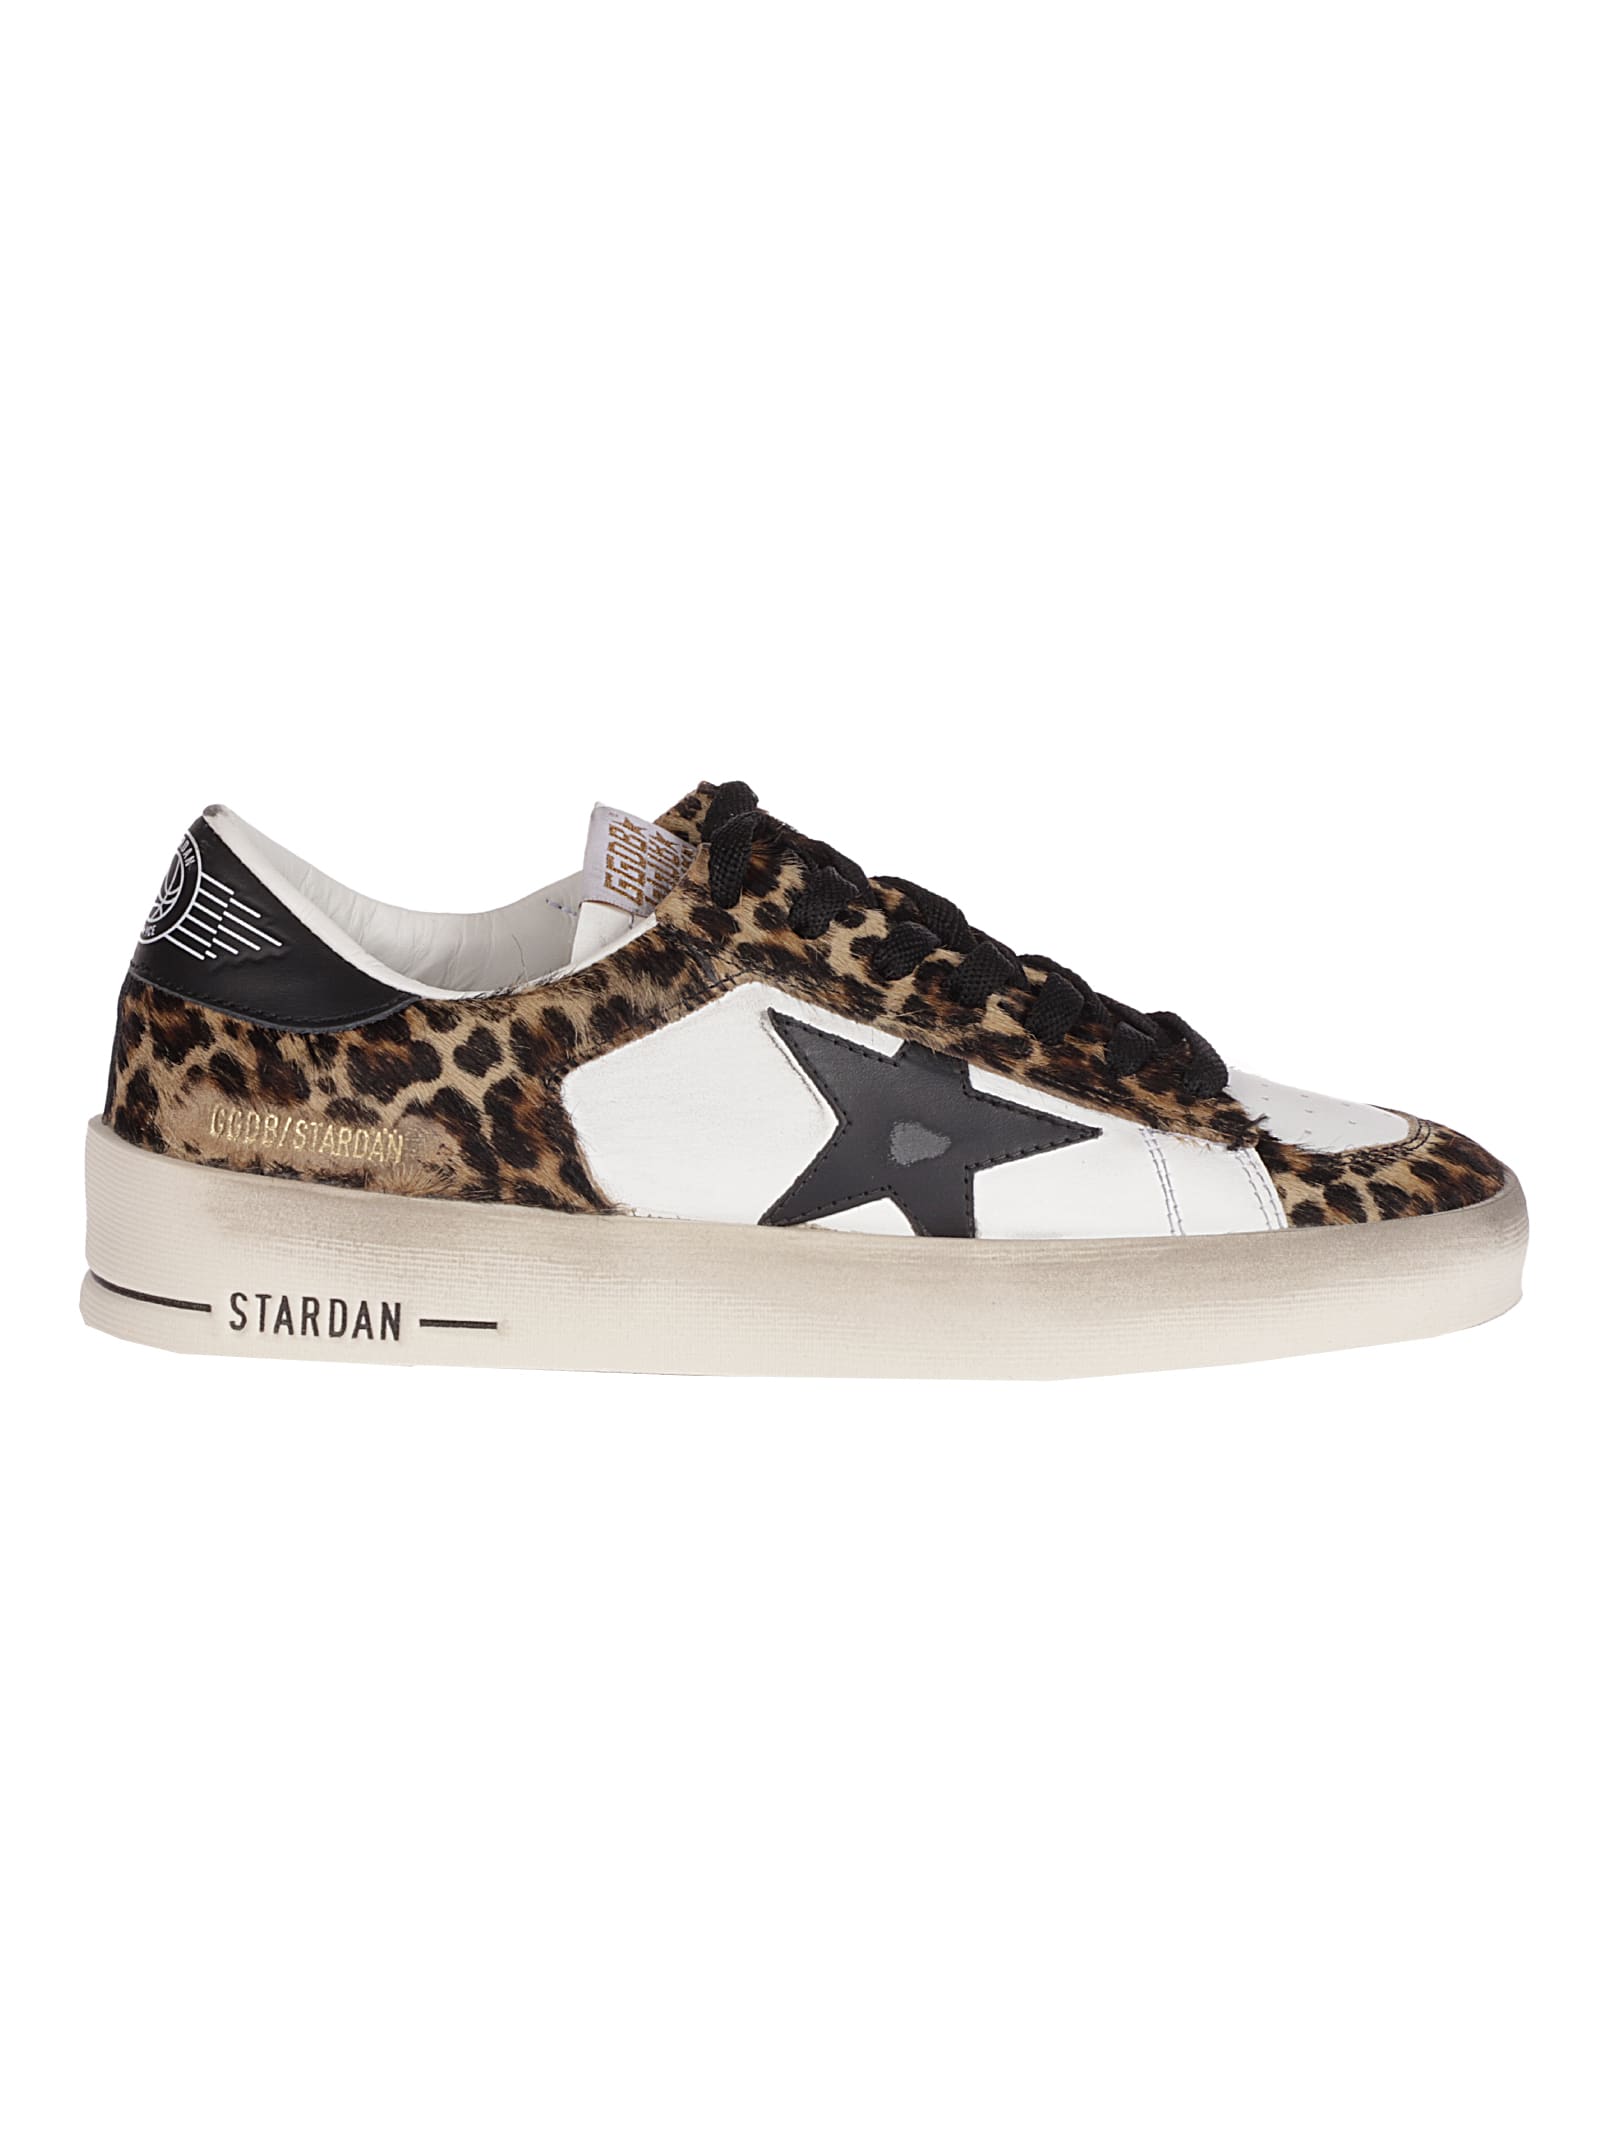 Golden Goose Stardan Leo Horsy And Leather Upper Leather Star A